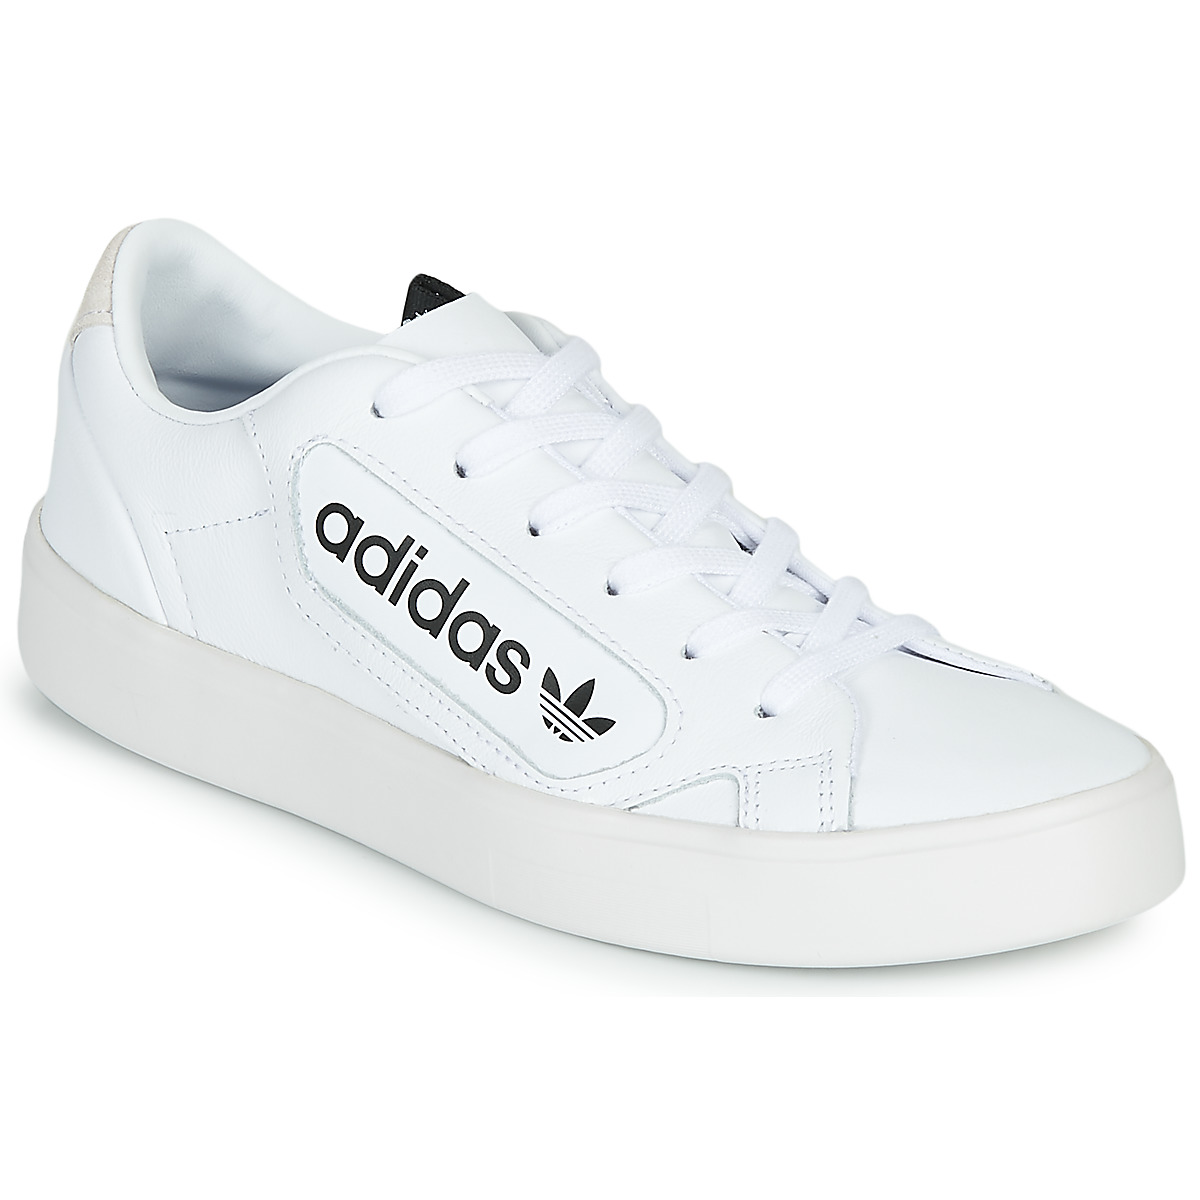 | trainers W - ! Originals adidas Spartoo - top £ Shoes delivery White Low adidas Free SLEEK Women UK